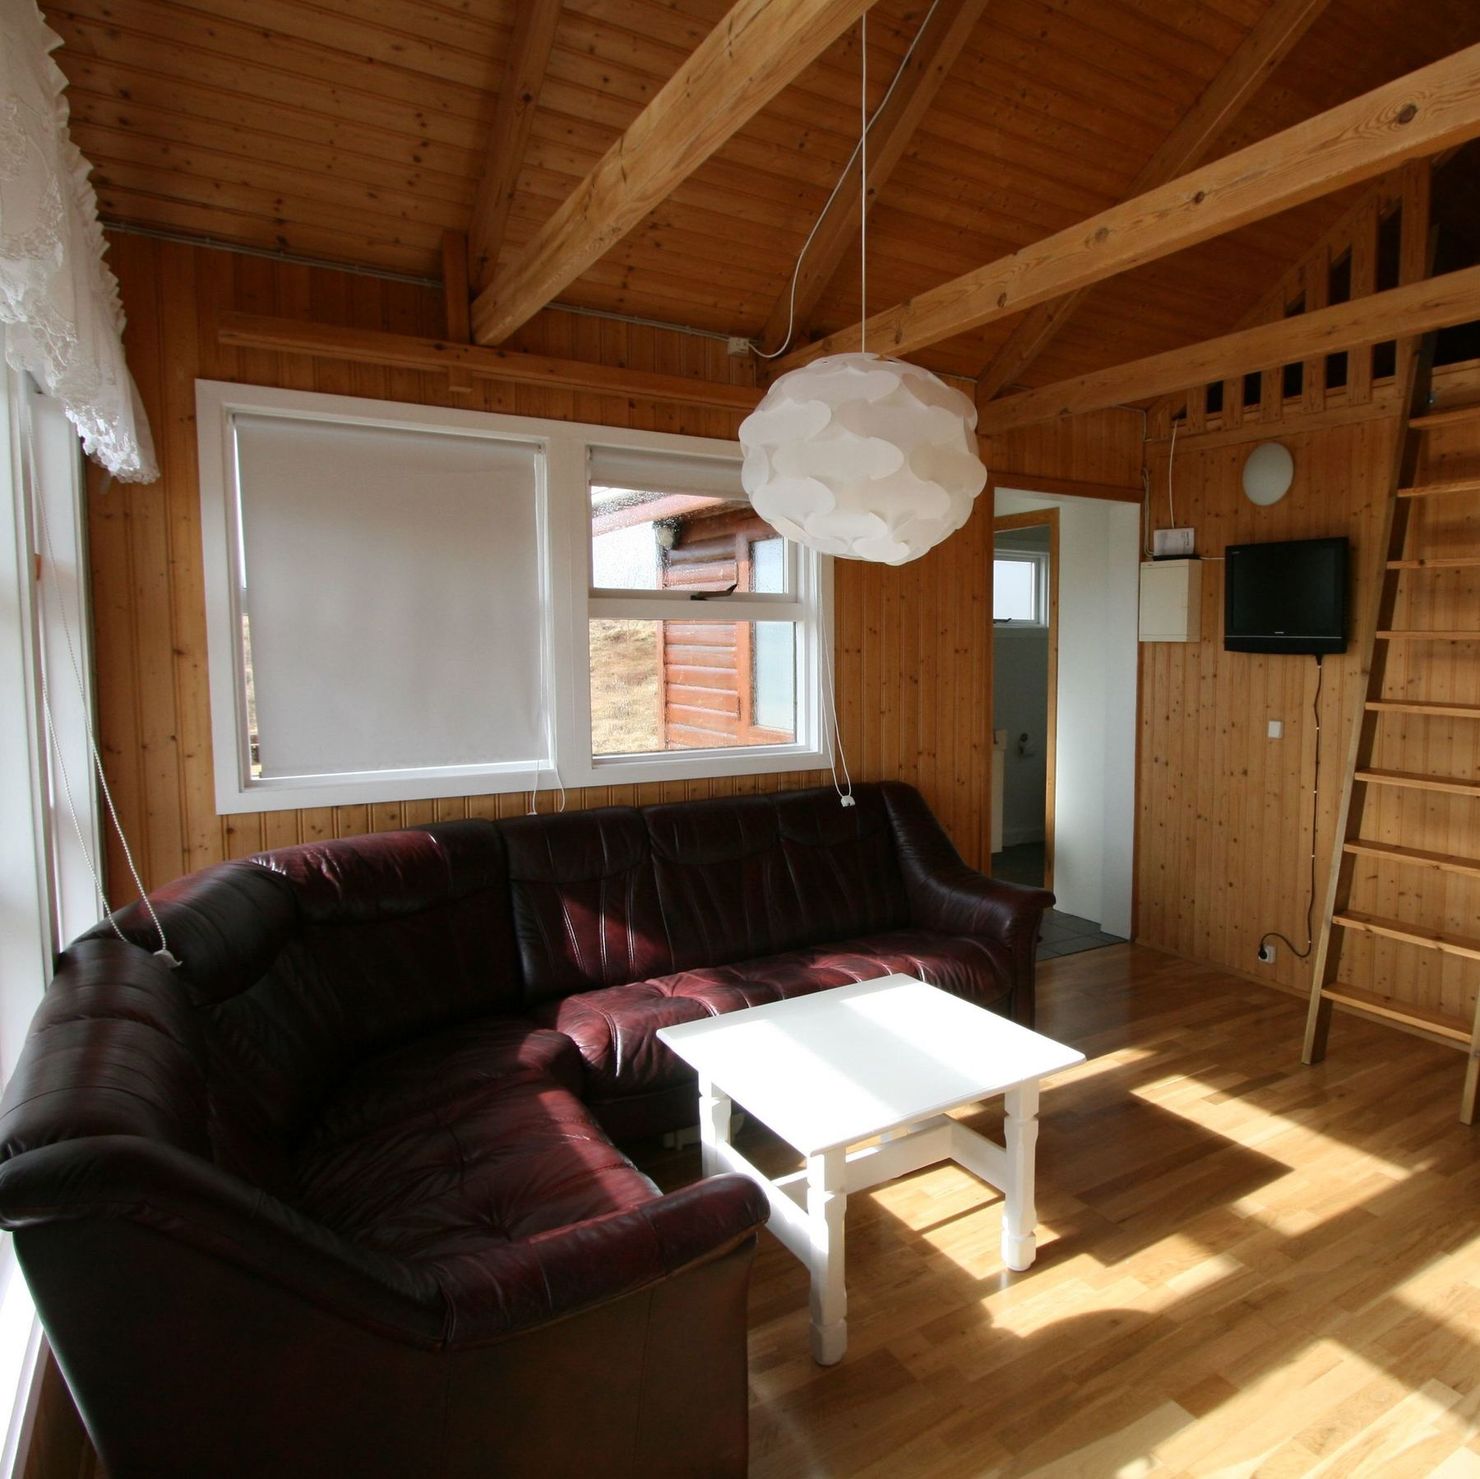 The living area with a large corner couch as well as the ladder to the loft